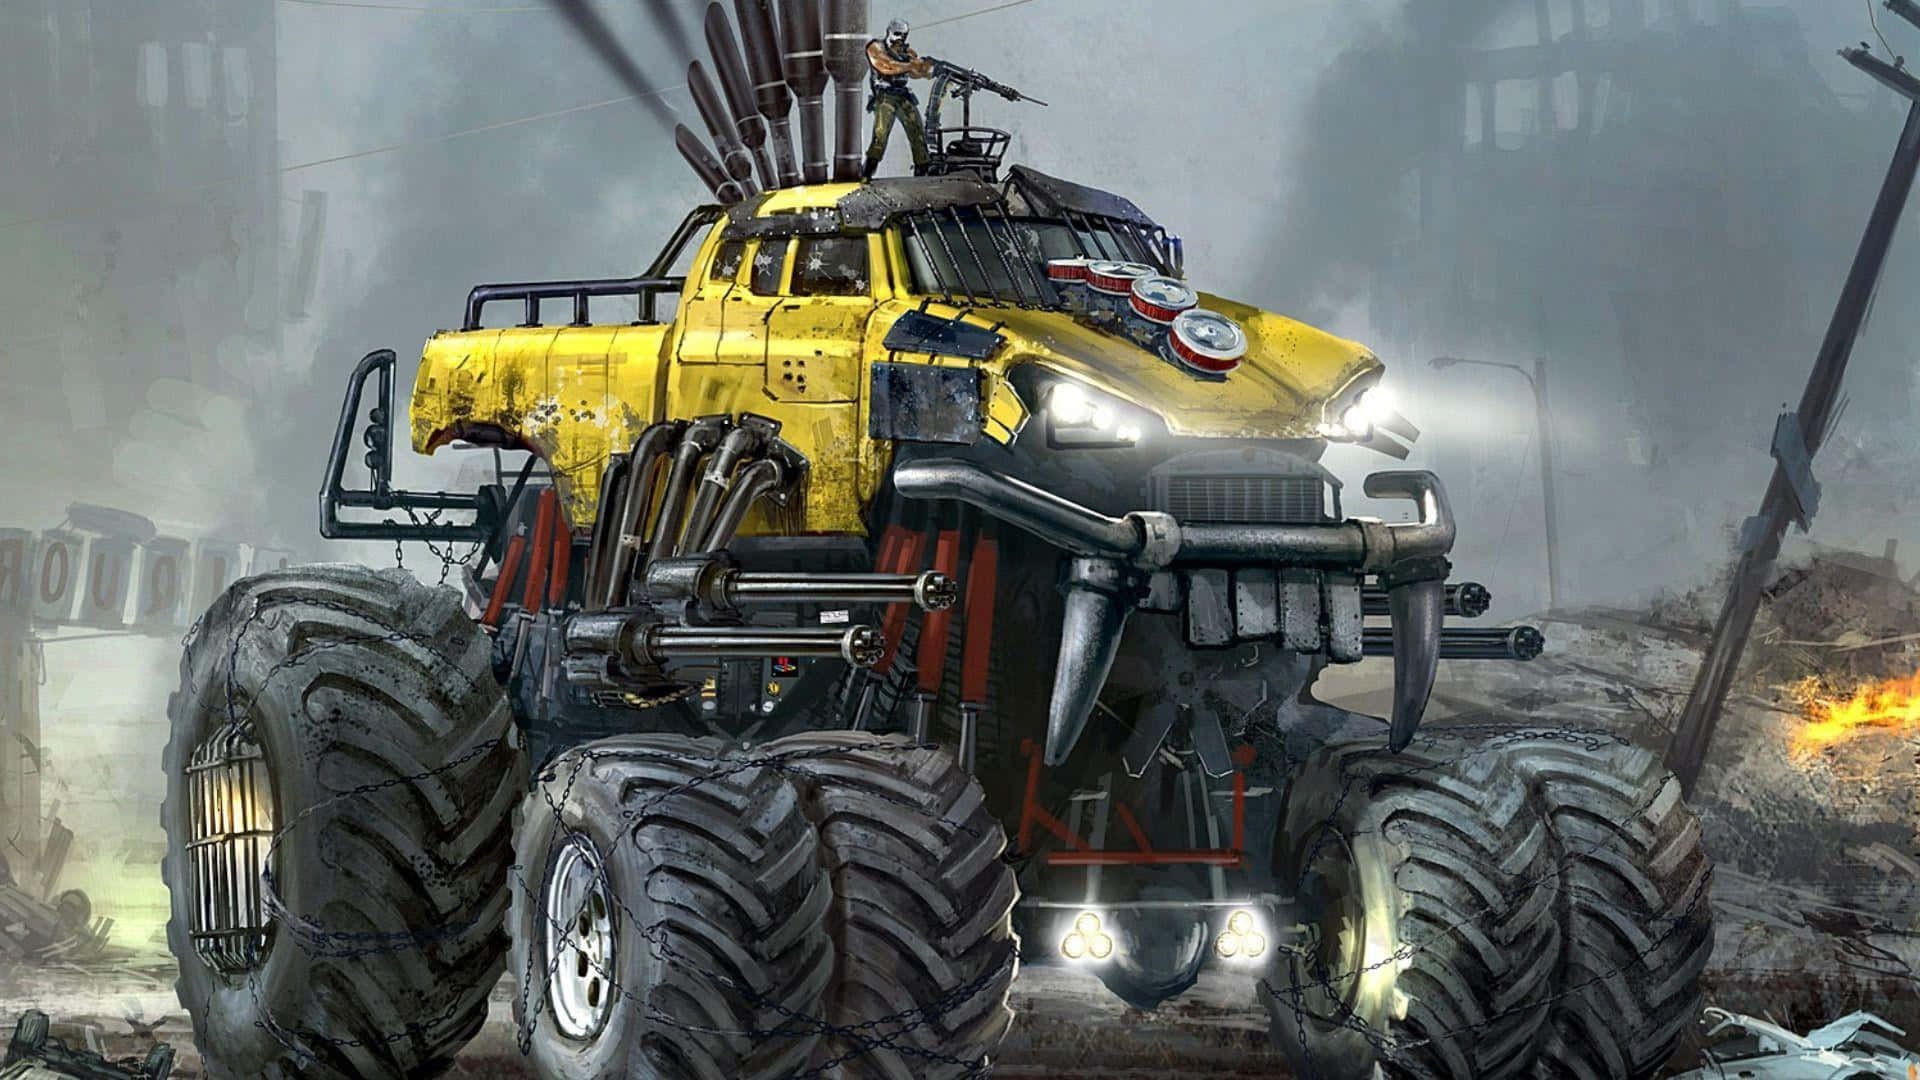 Caption: Powerful Monster Truck in Action Wallpaper